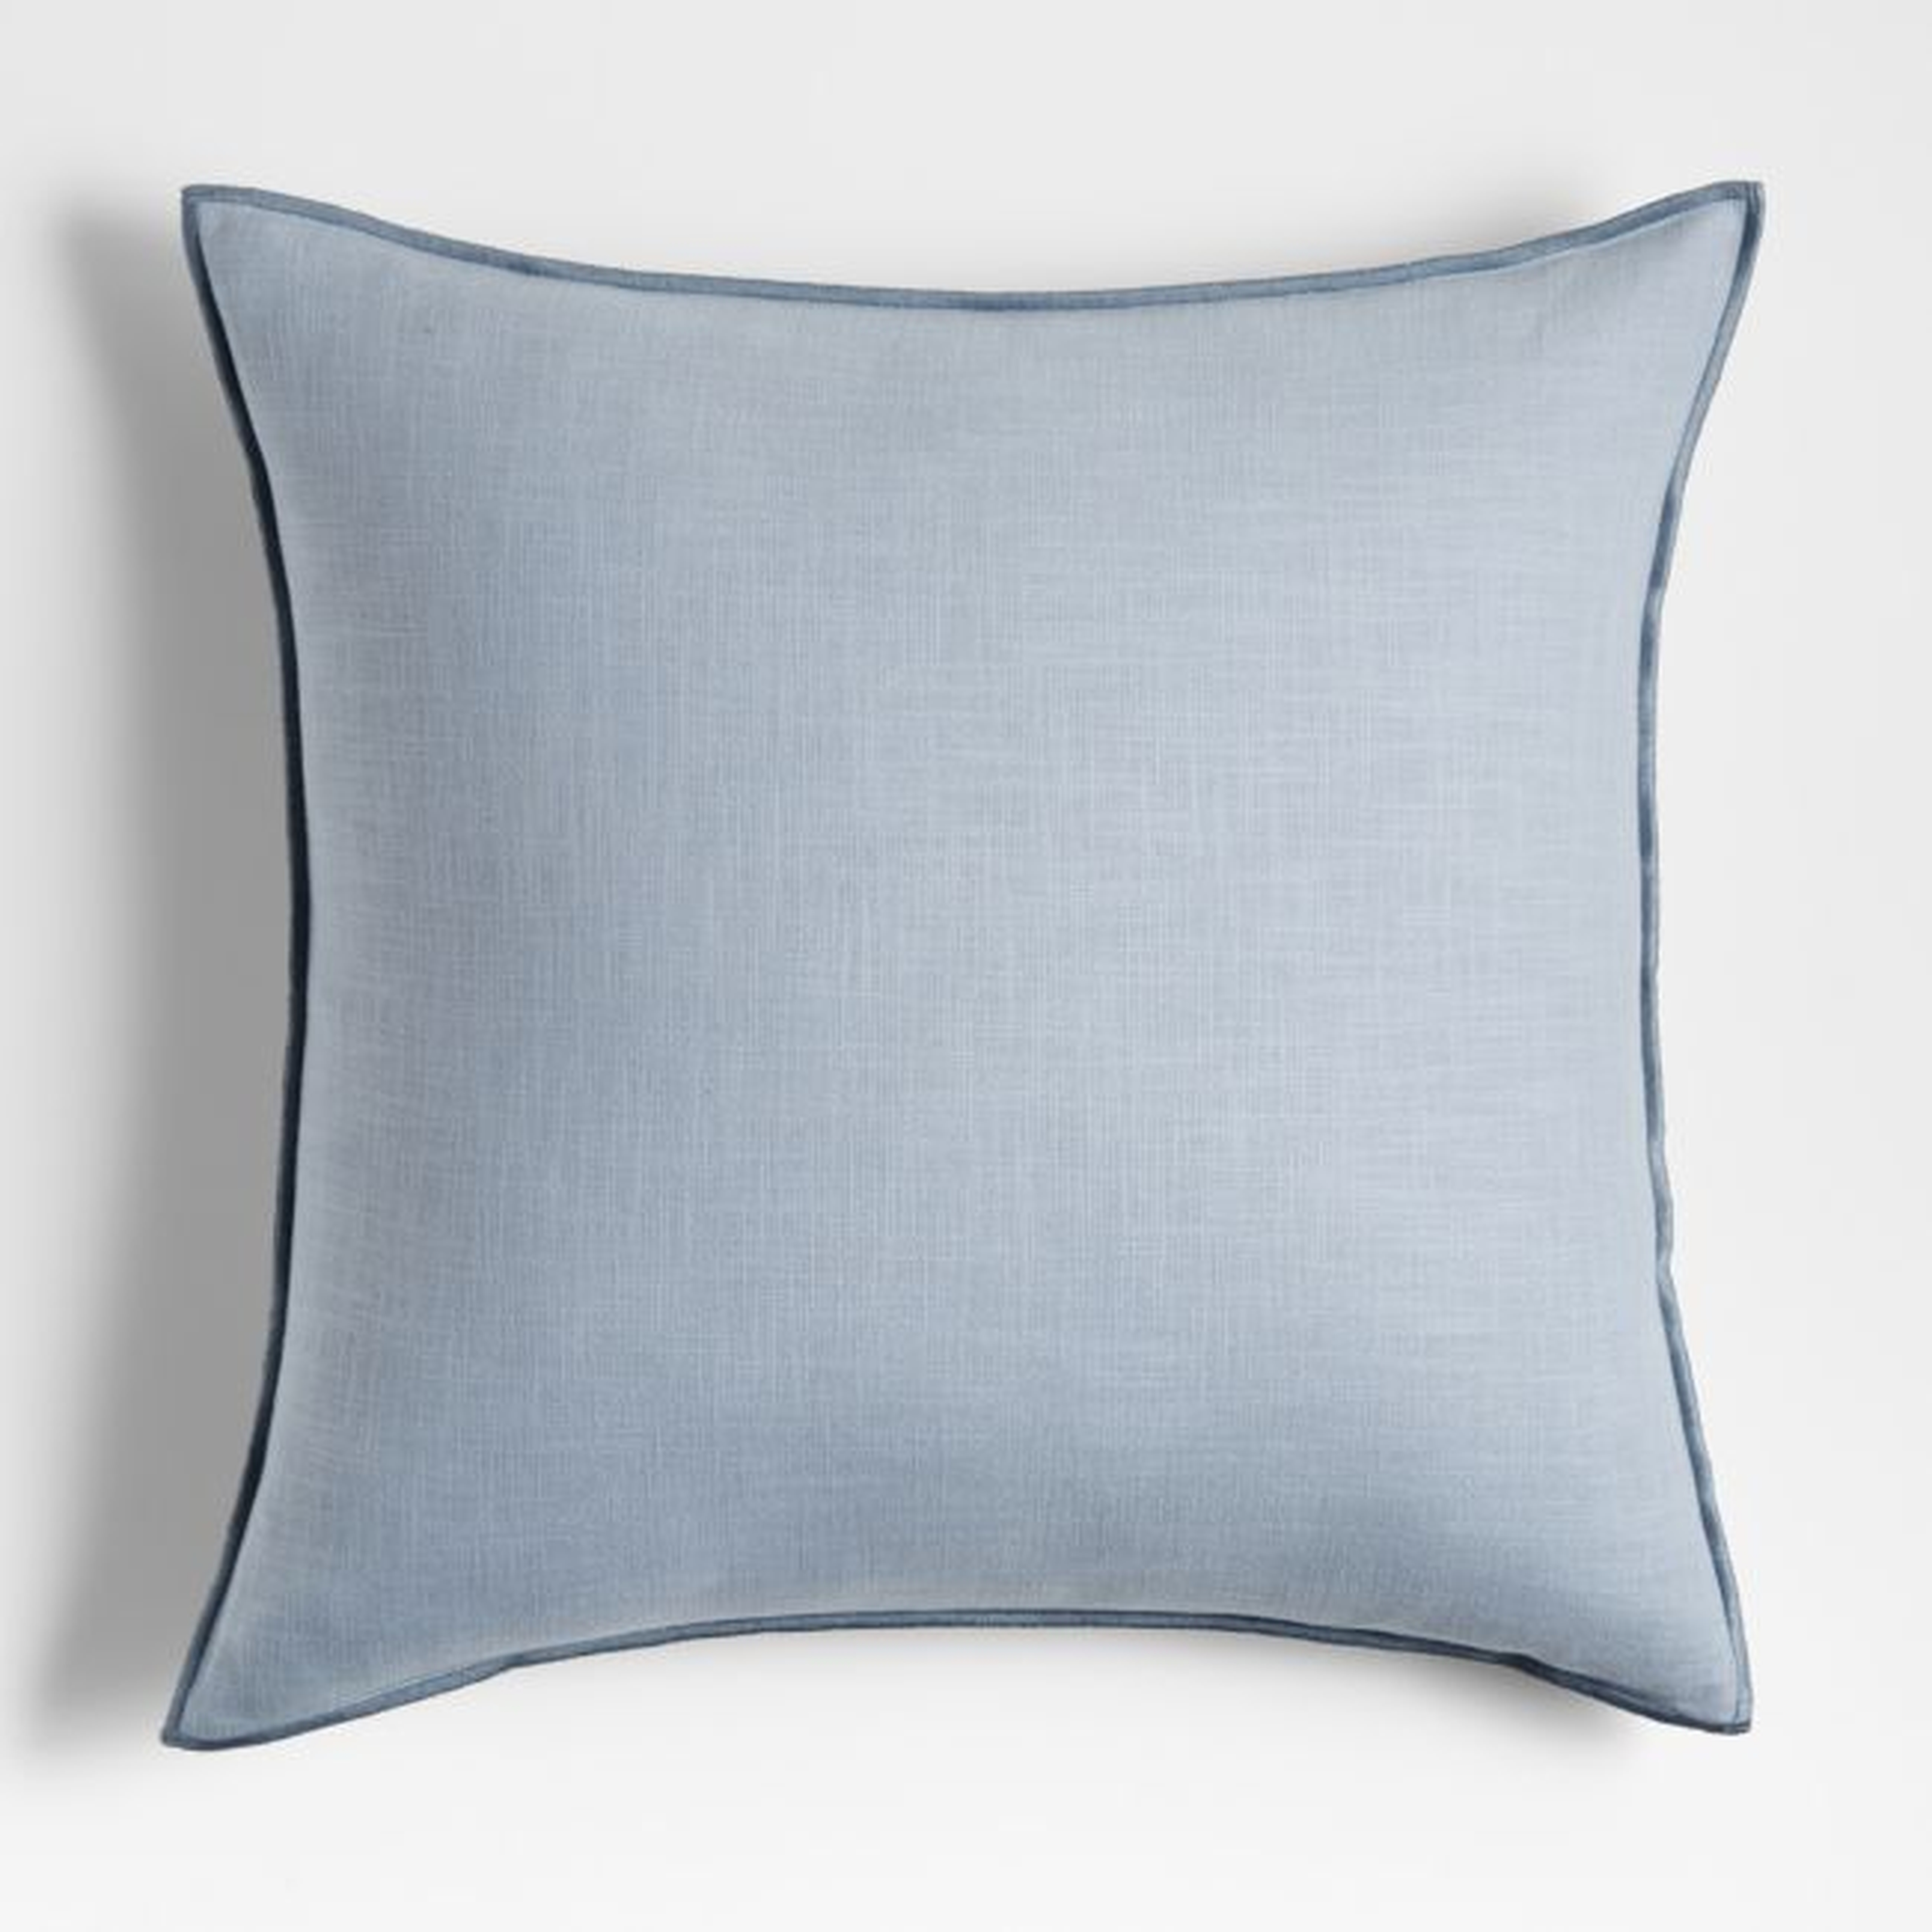 Quarry 23" Merrow Stitch Cotton Pillow with Down-Alternative Insert - Crate and Barrel